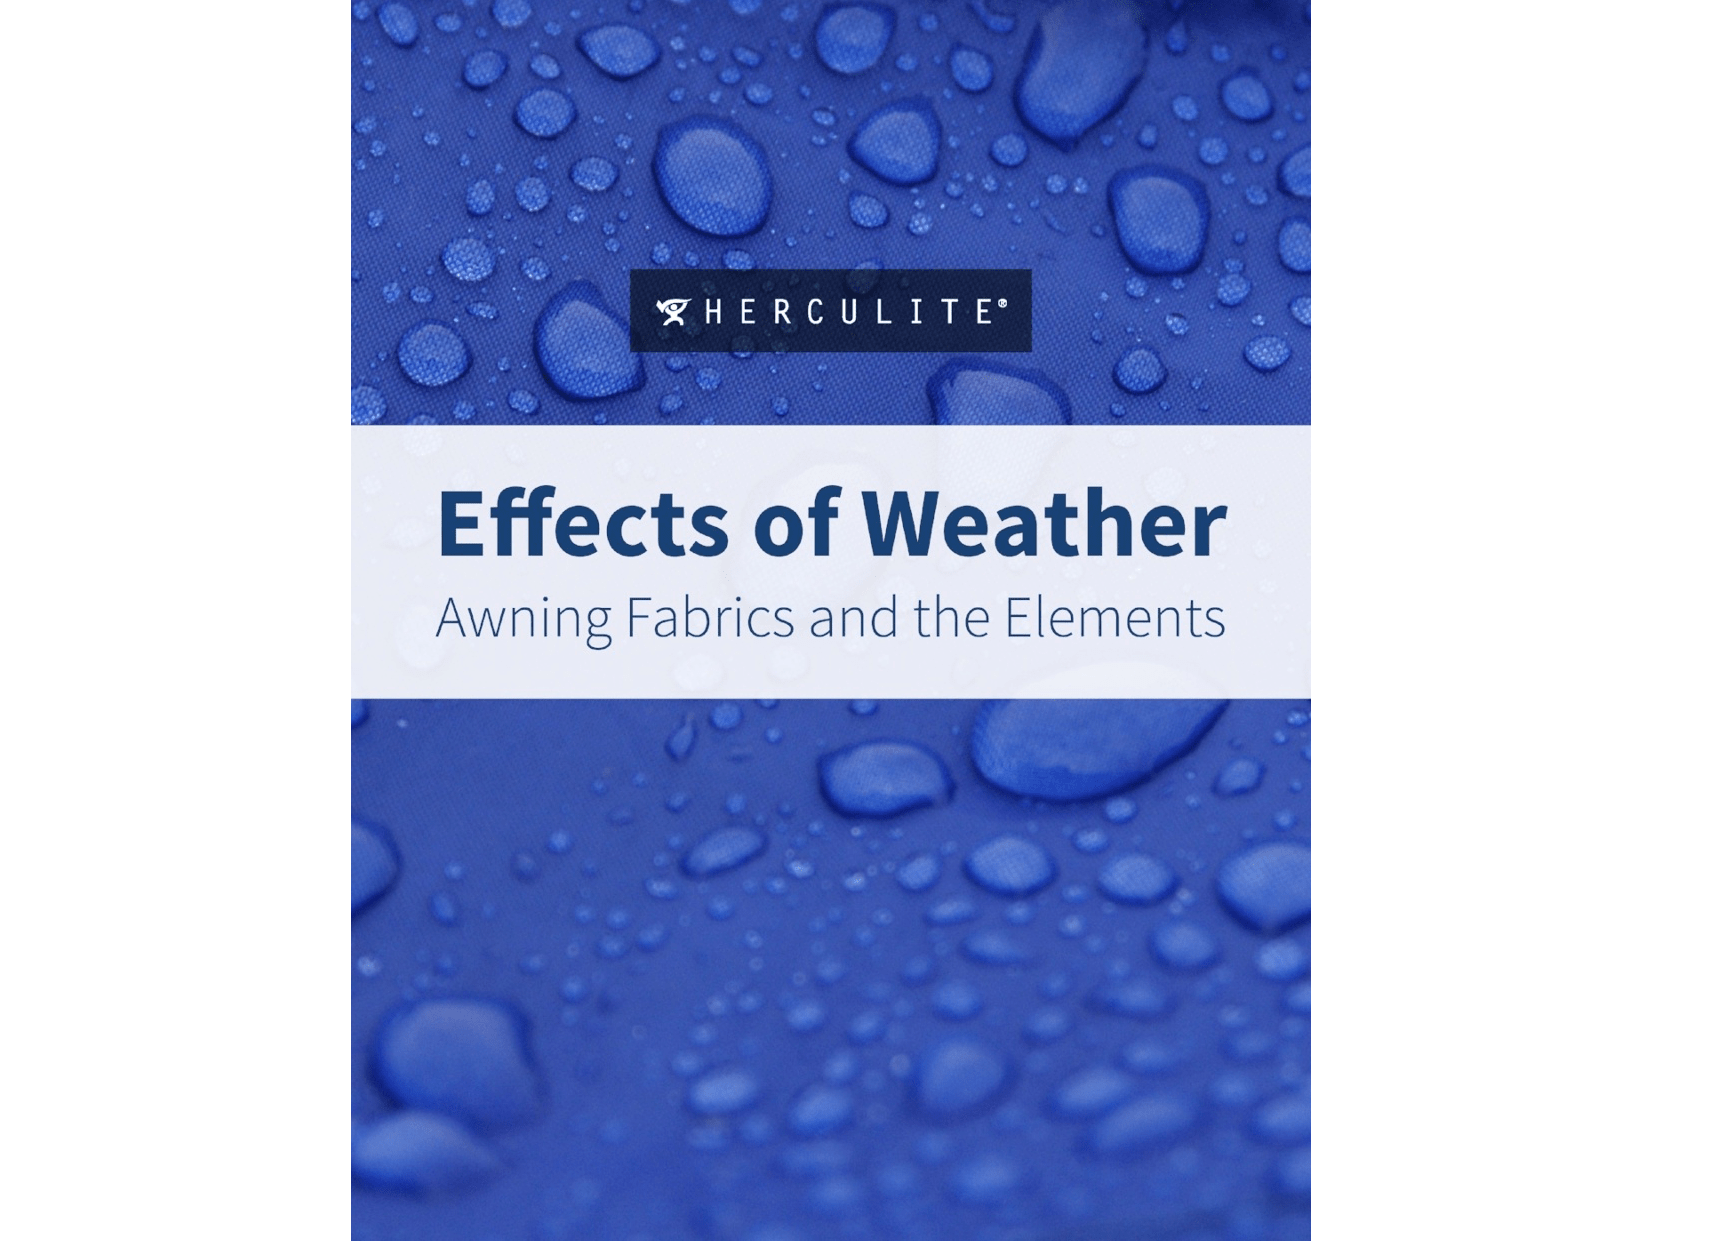 Effects_of_Weather_Awning_Fabrics_and_the_Elements_Guide_Resource_Cover_TransparentBG-min.png